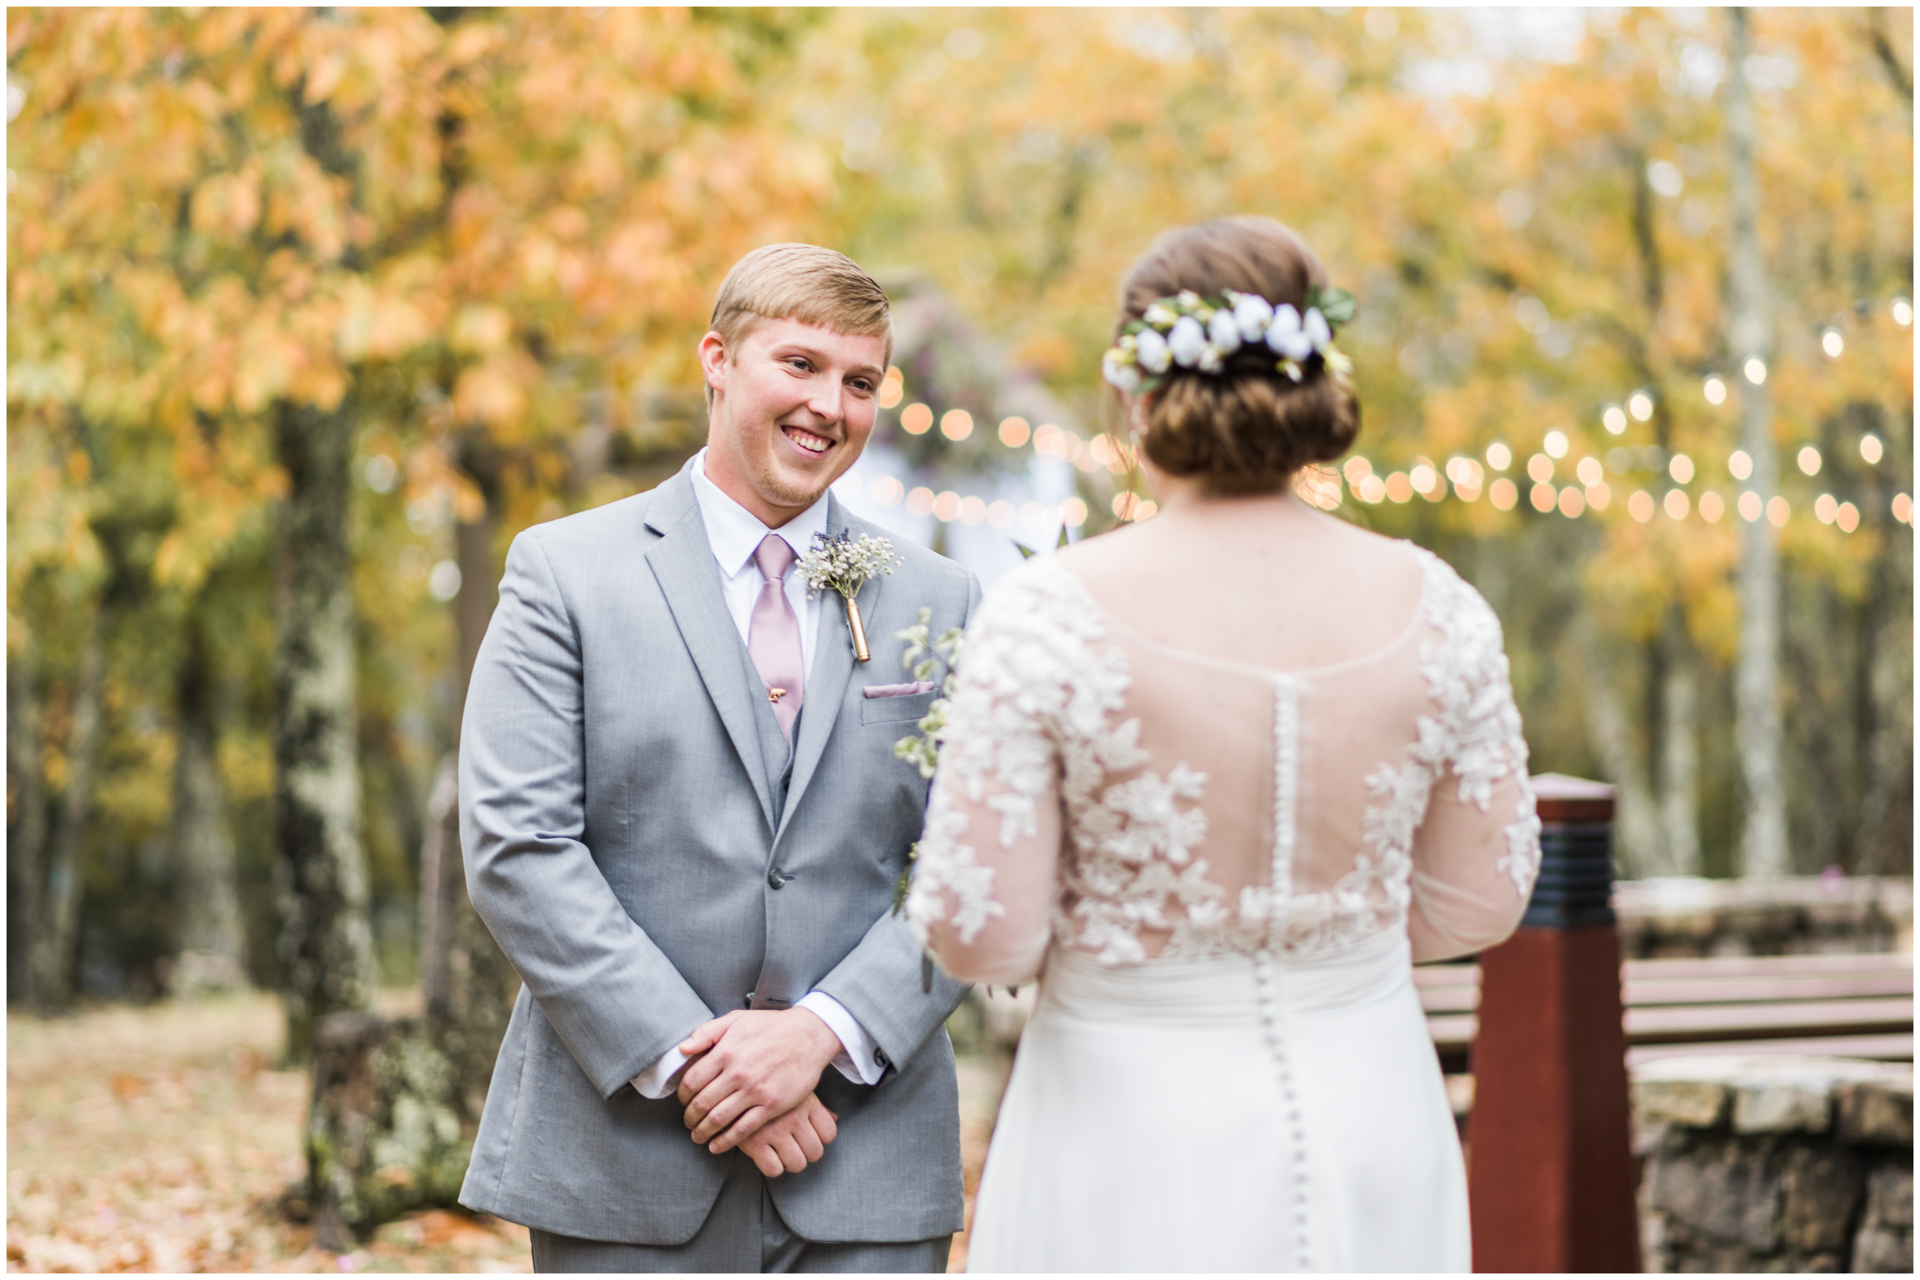 Monte Sano Lodge Fall Wedding Photography First Look Groom in Grey Suit String Lights on Background - Huntsville Wedding Photographer